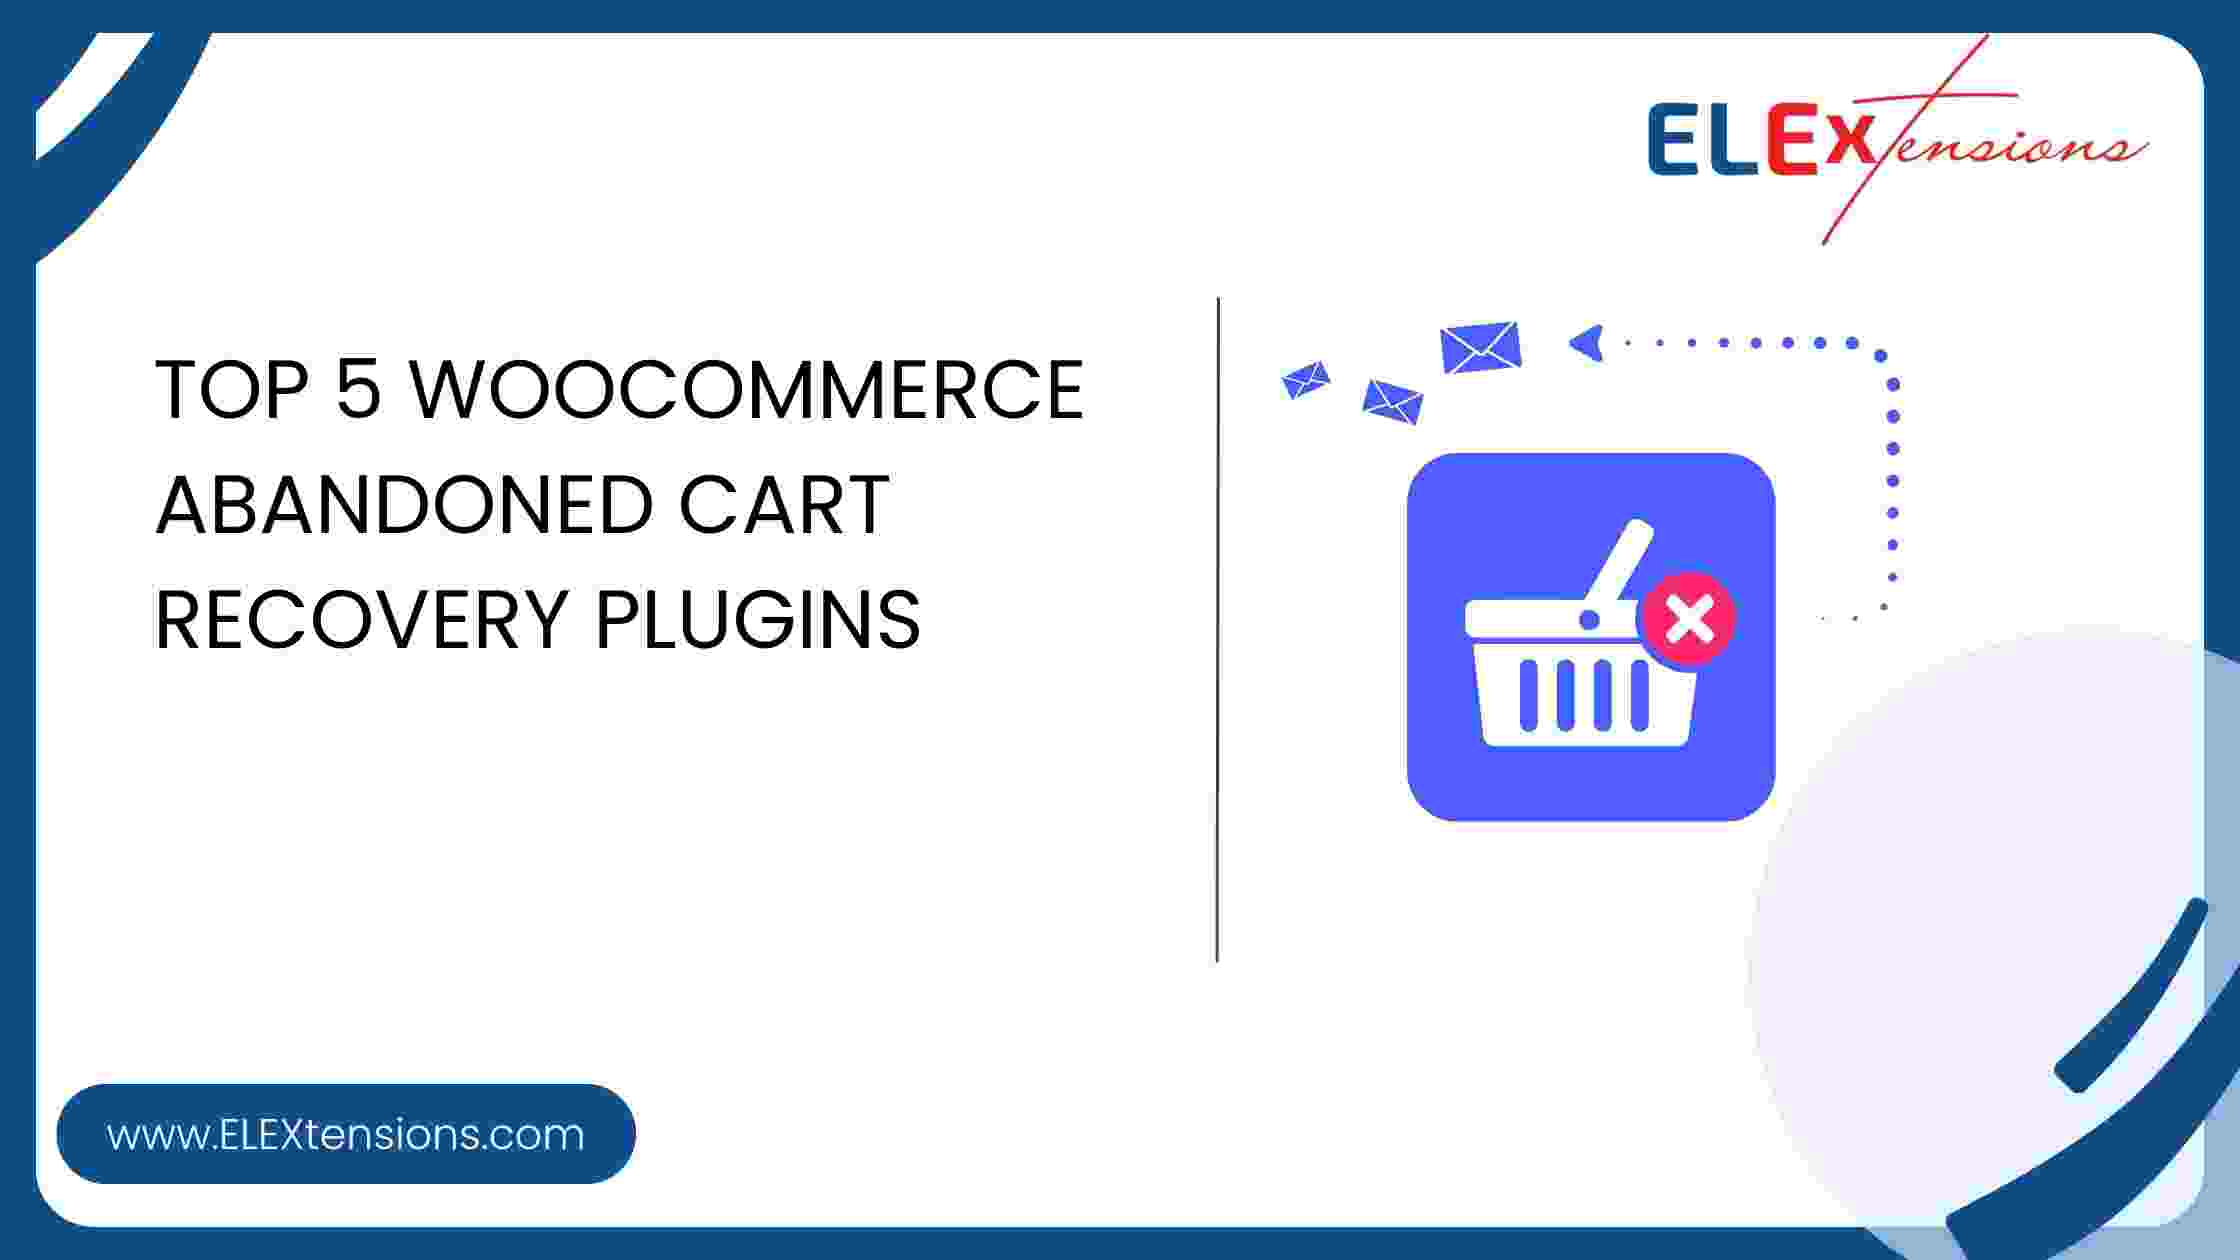 Top 5 WooCommerce Abandoned Cart Recovery Plugins